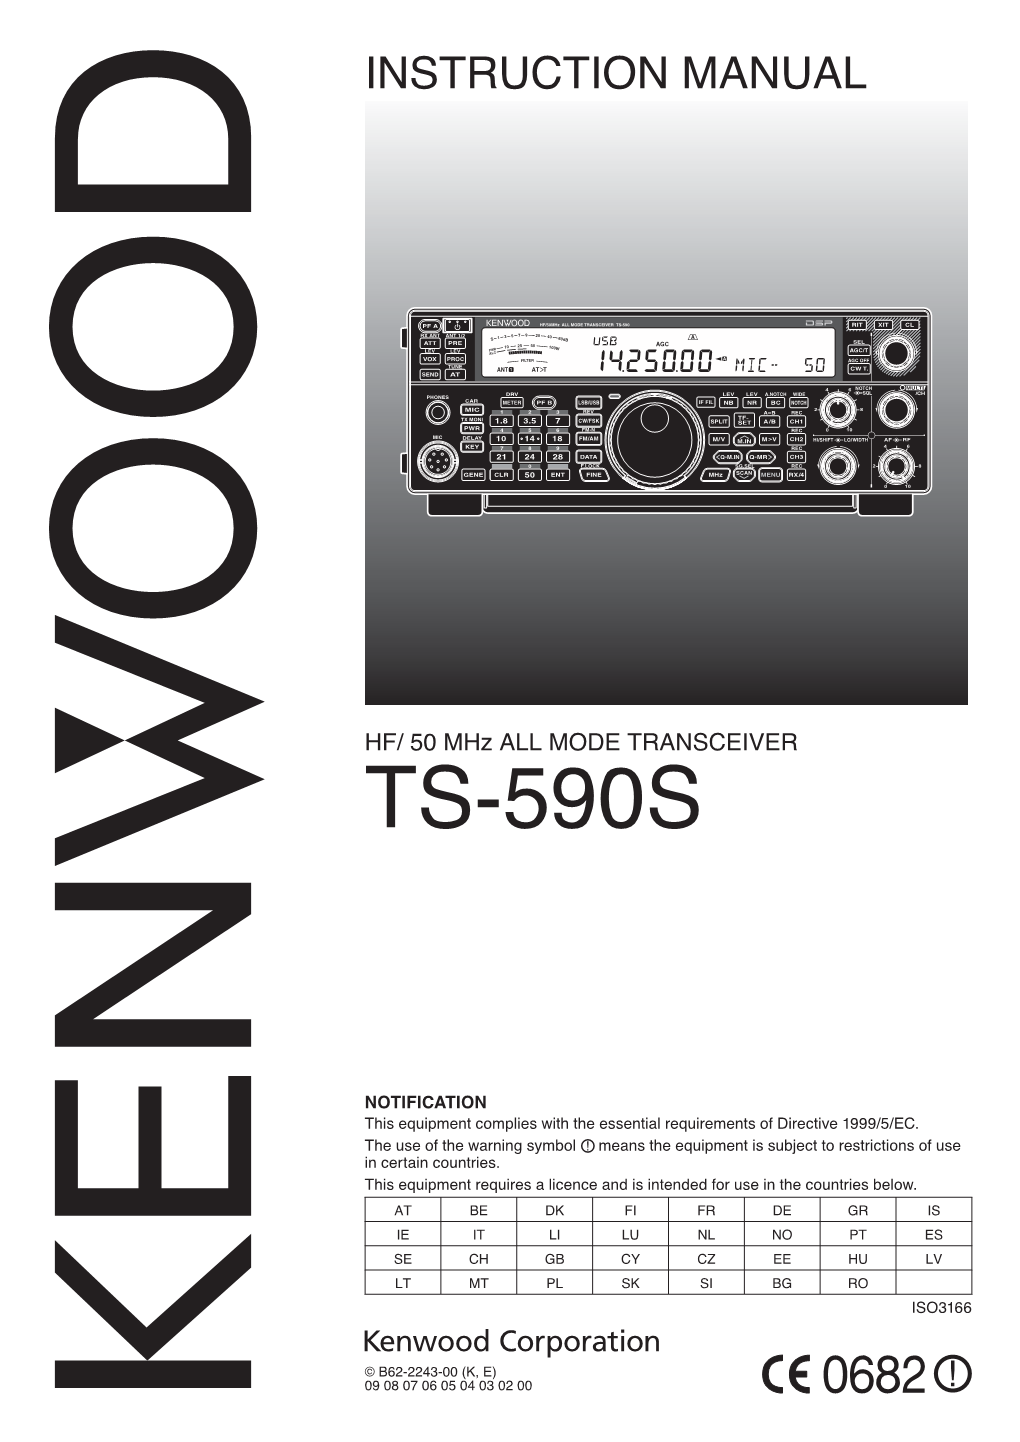 Kenwood TS-590S One Or More of the Following Statements May Be Transceiver